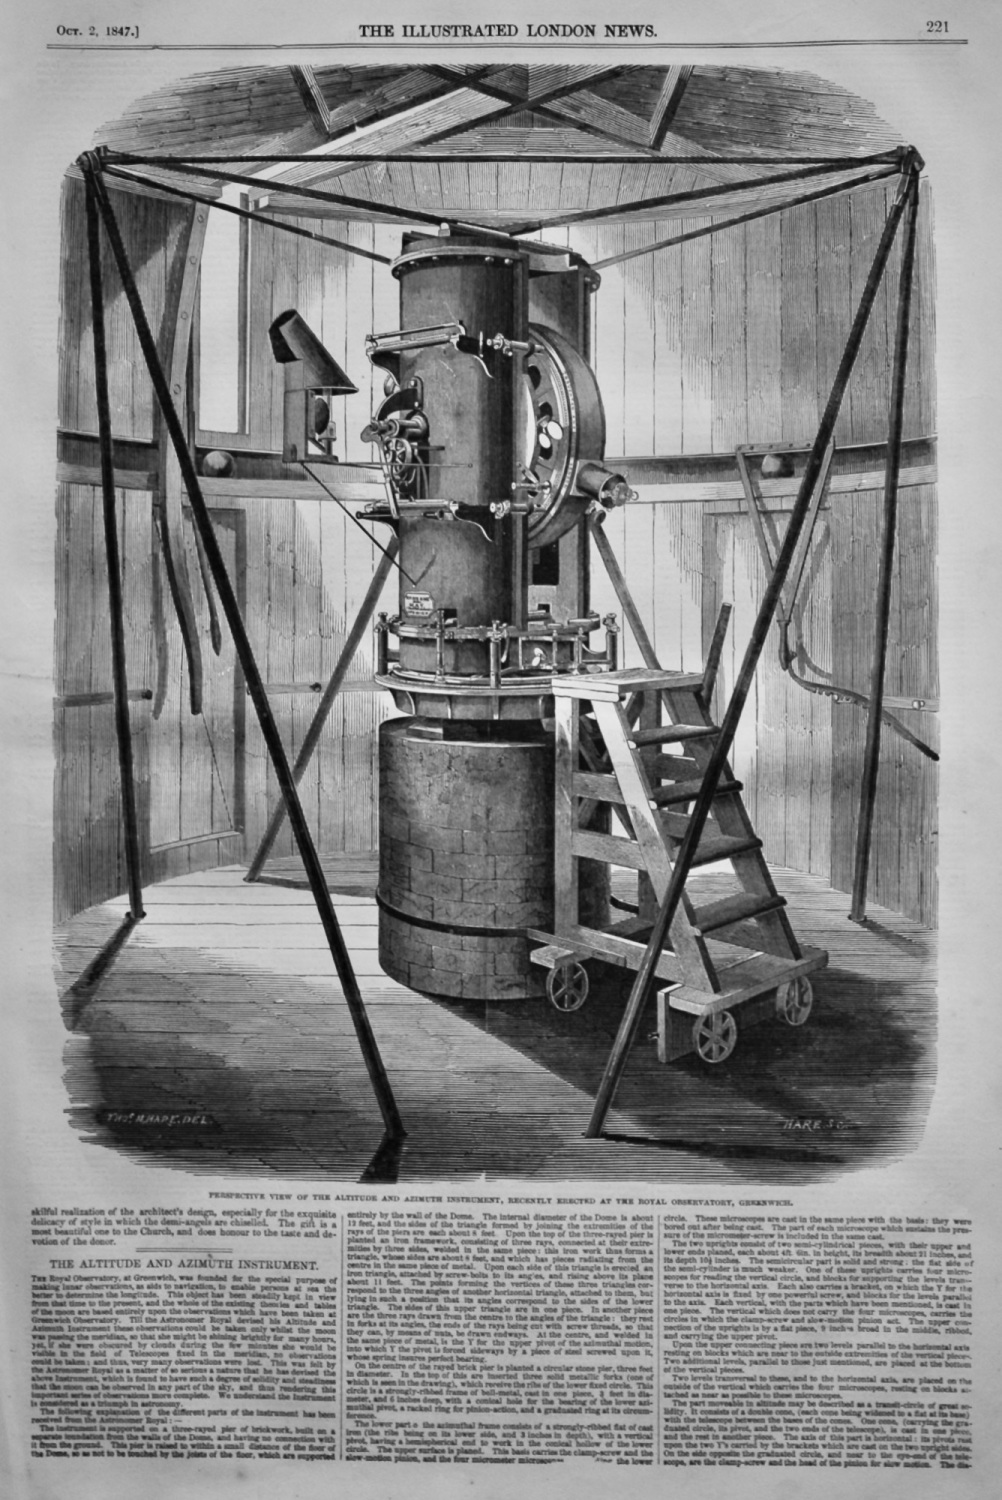 The Altitude and Azimuth Instrument.  1847.